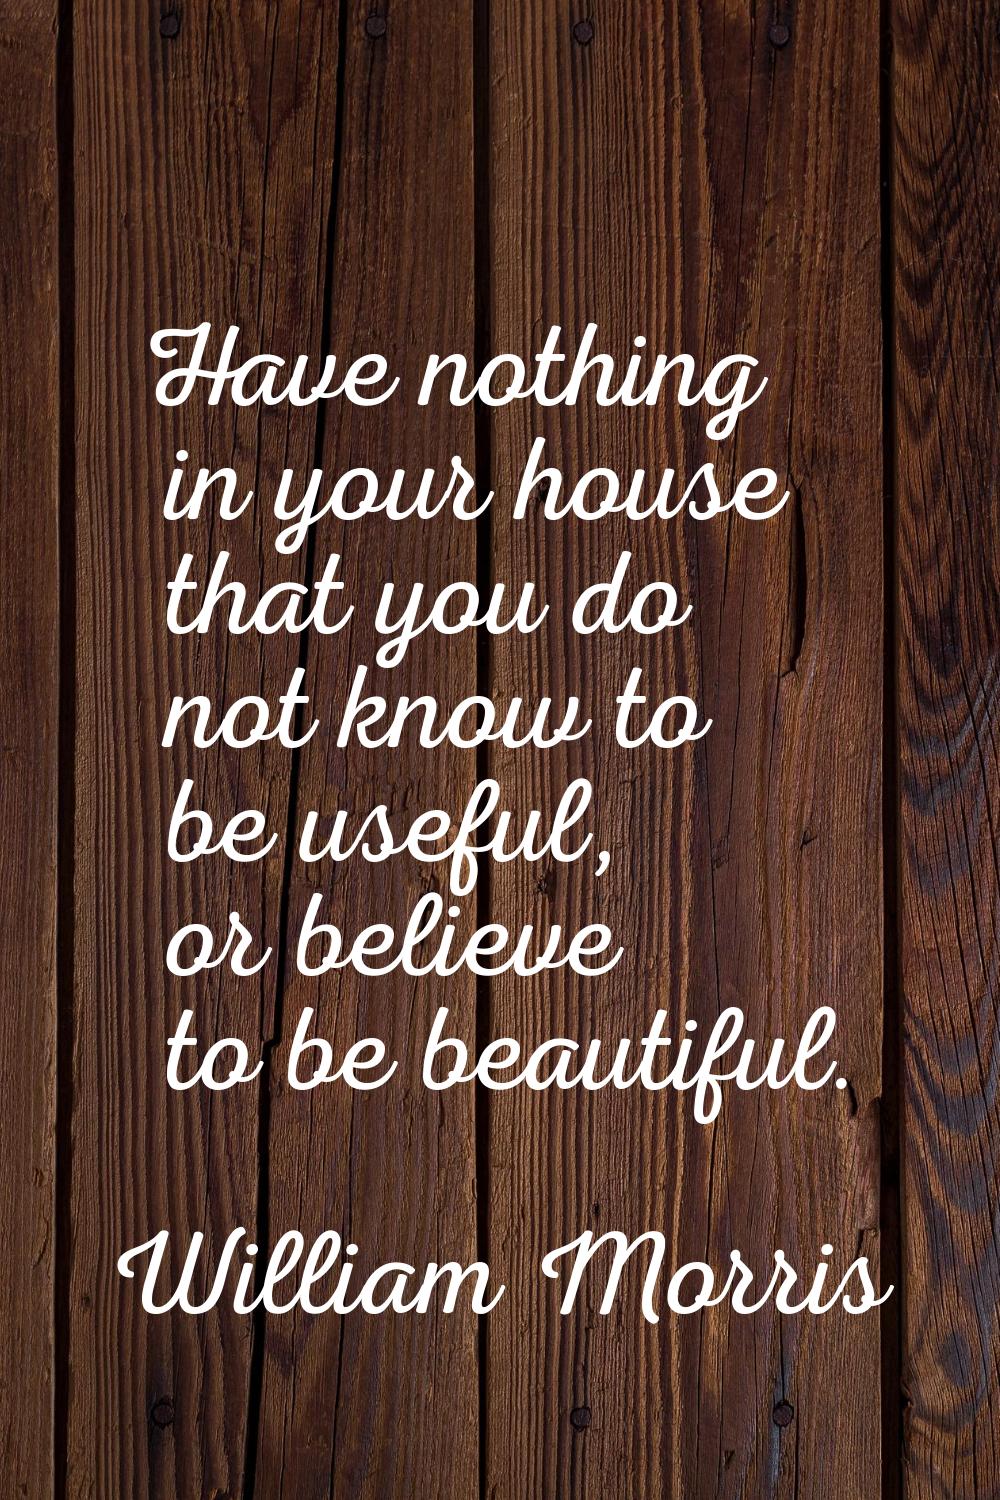 Have nothing in your house that you do not know to be useful, or believe to be beautiful.